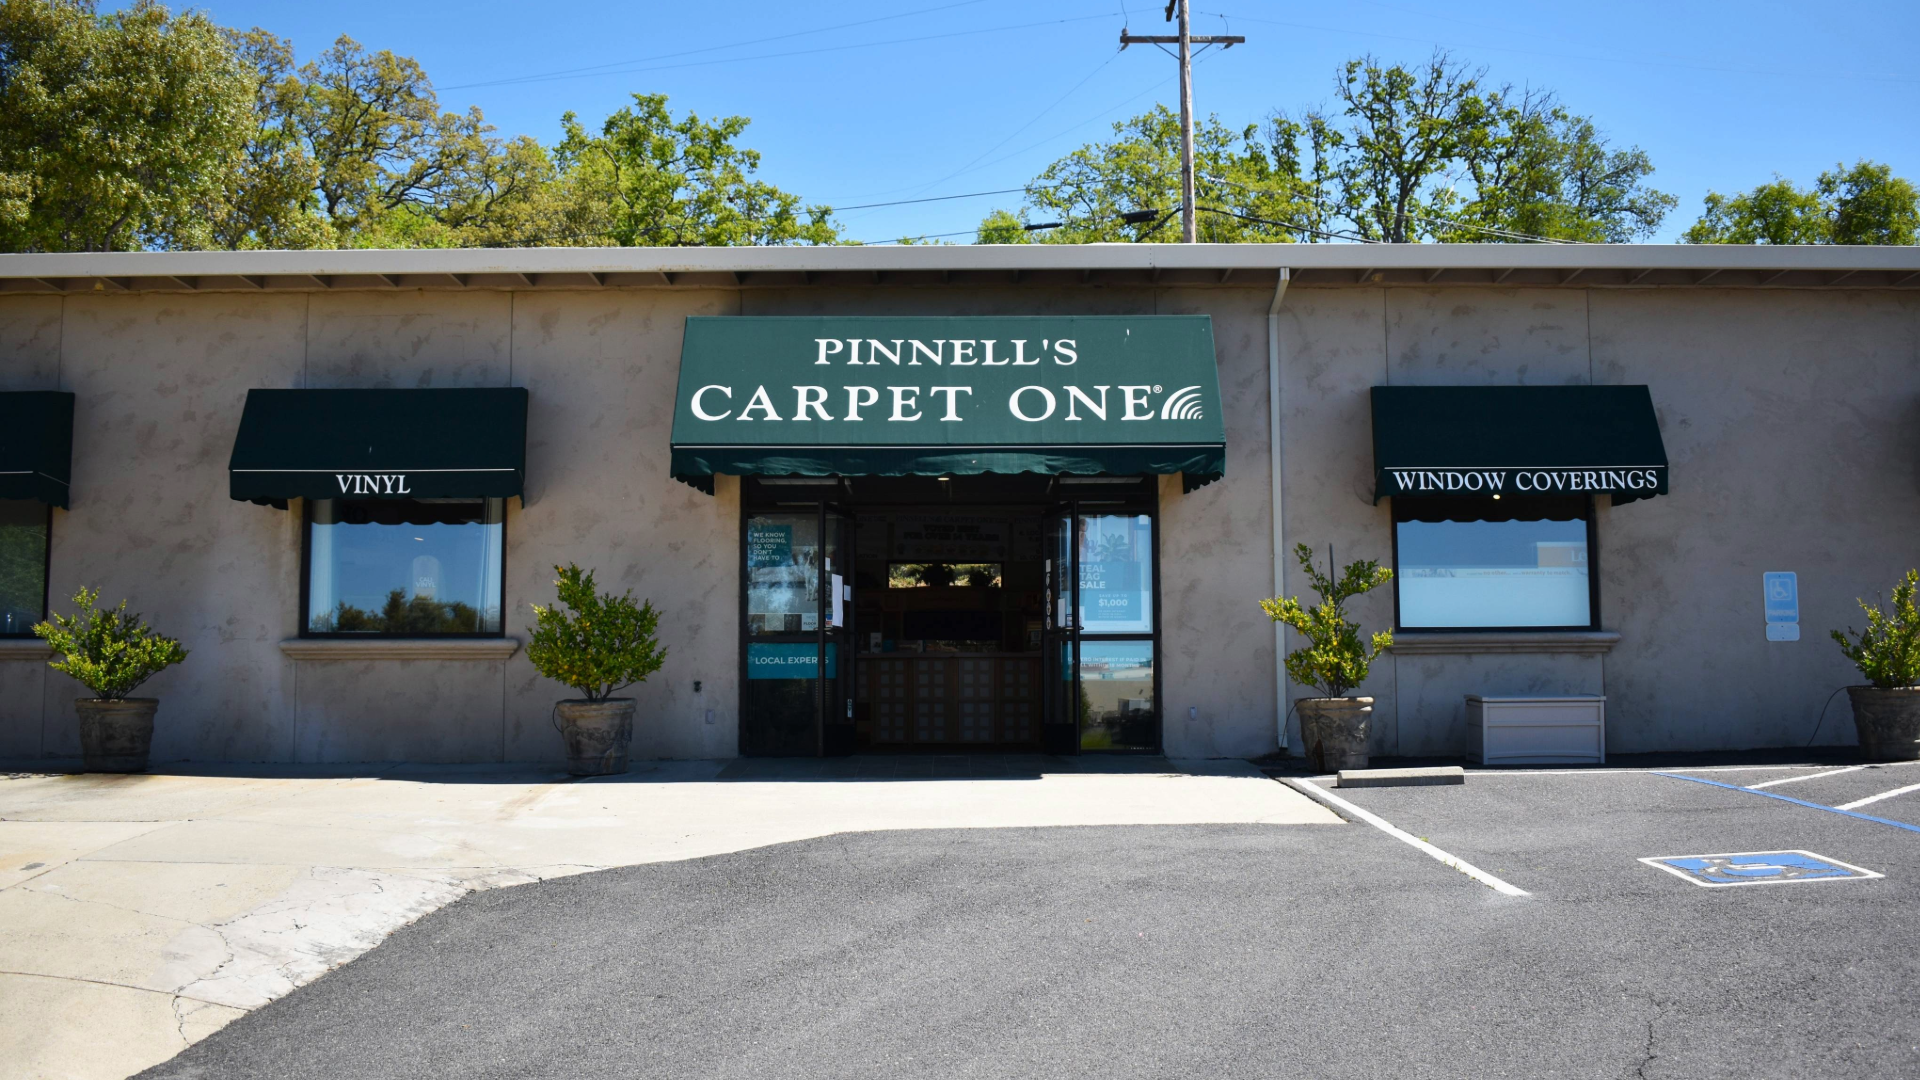 Pinnell's Carpet One, a local flooring stores storefront in Sonora